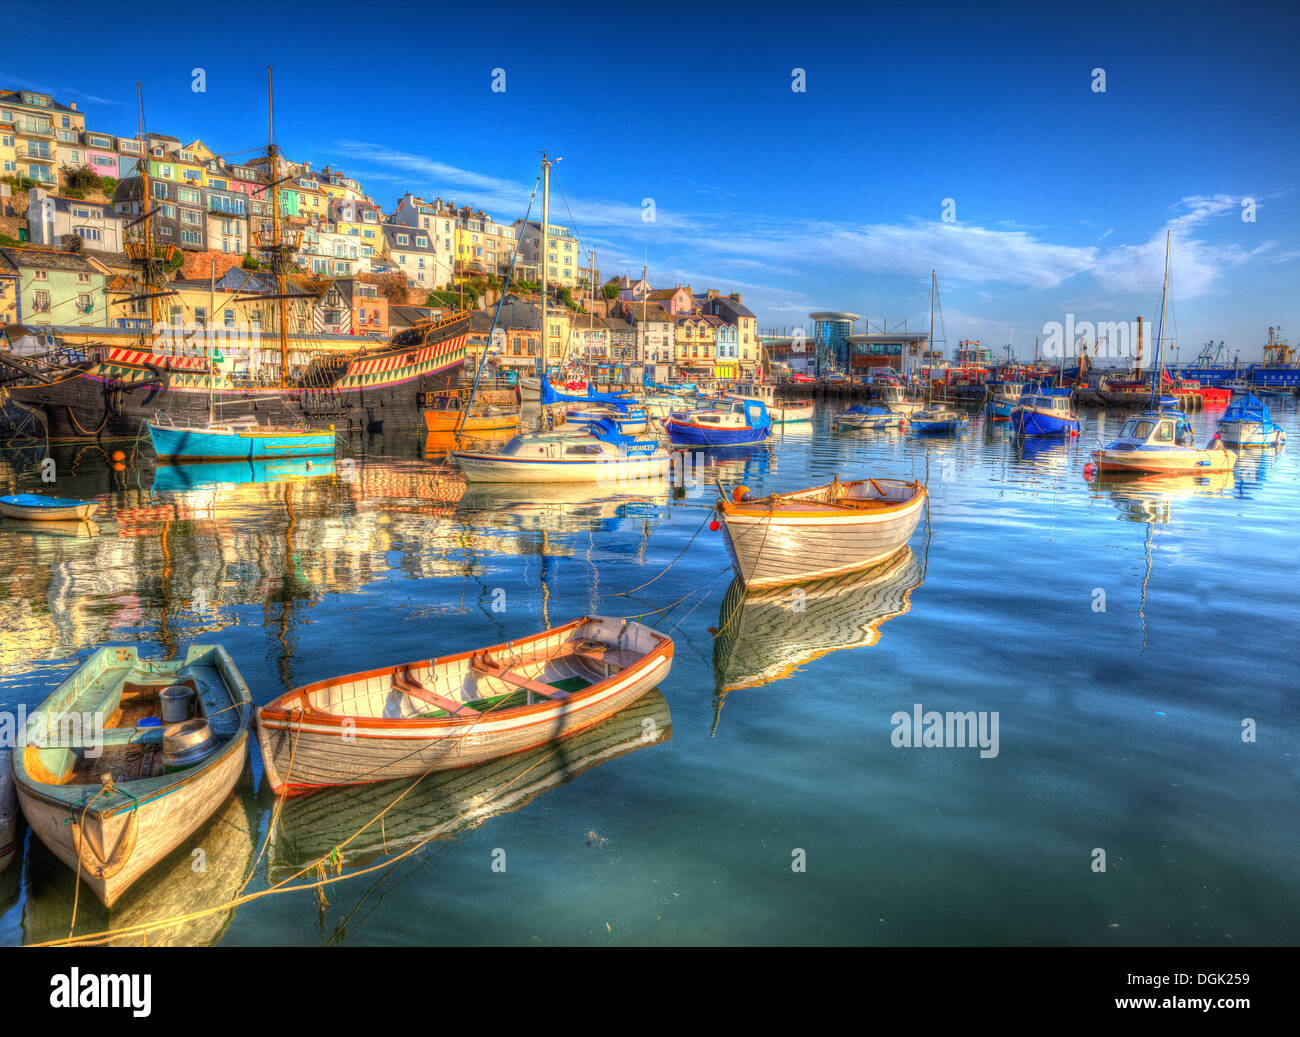 Brixham harbour Devon England UK English fishing scene with boats and blue sea and sky in HDR Stock Photo